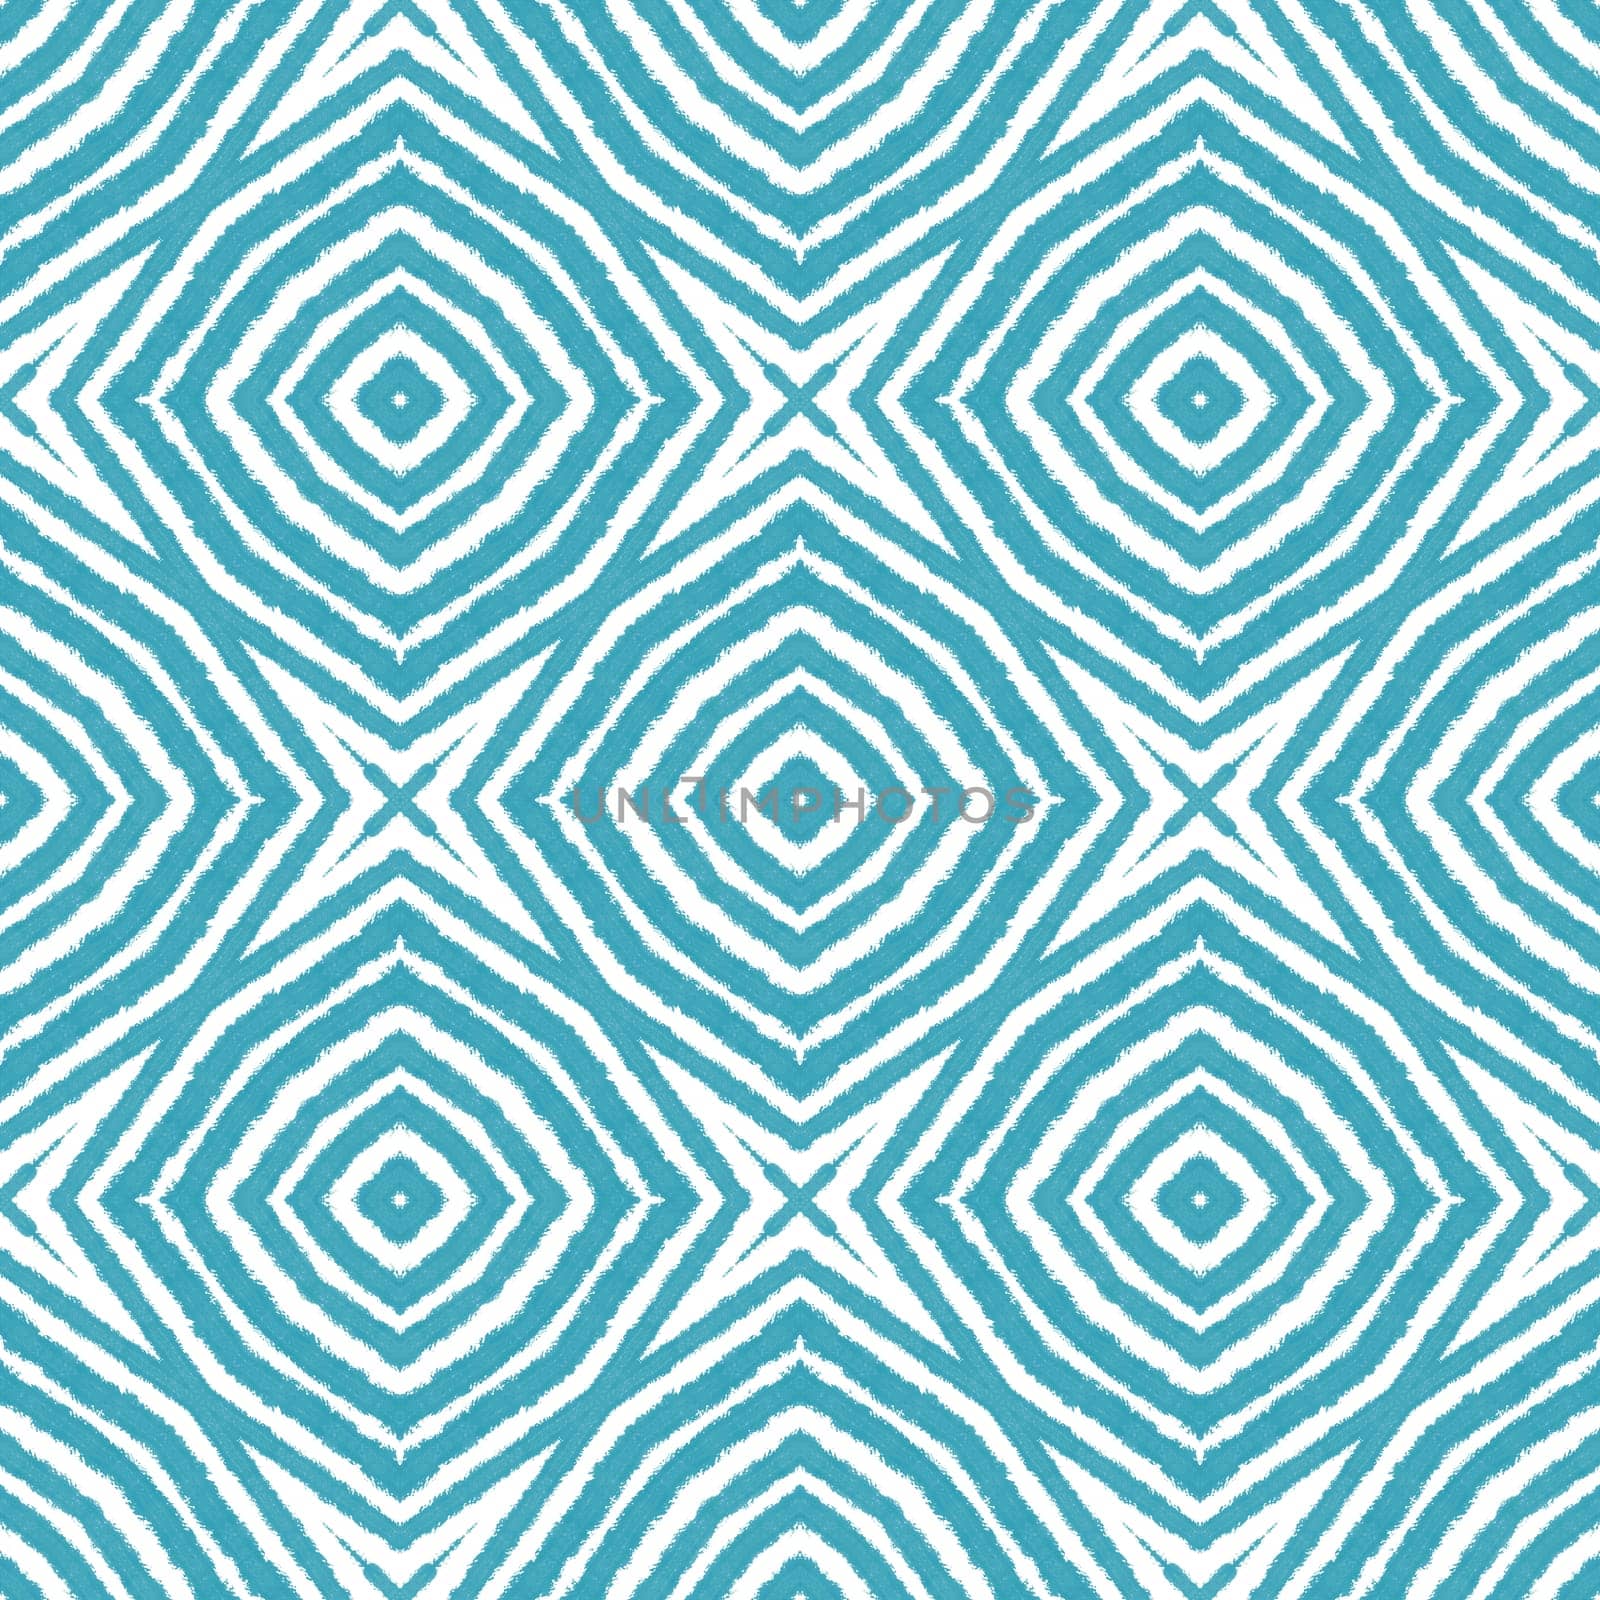 Ethnic hand painted pattern. Turquoise by beginagain